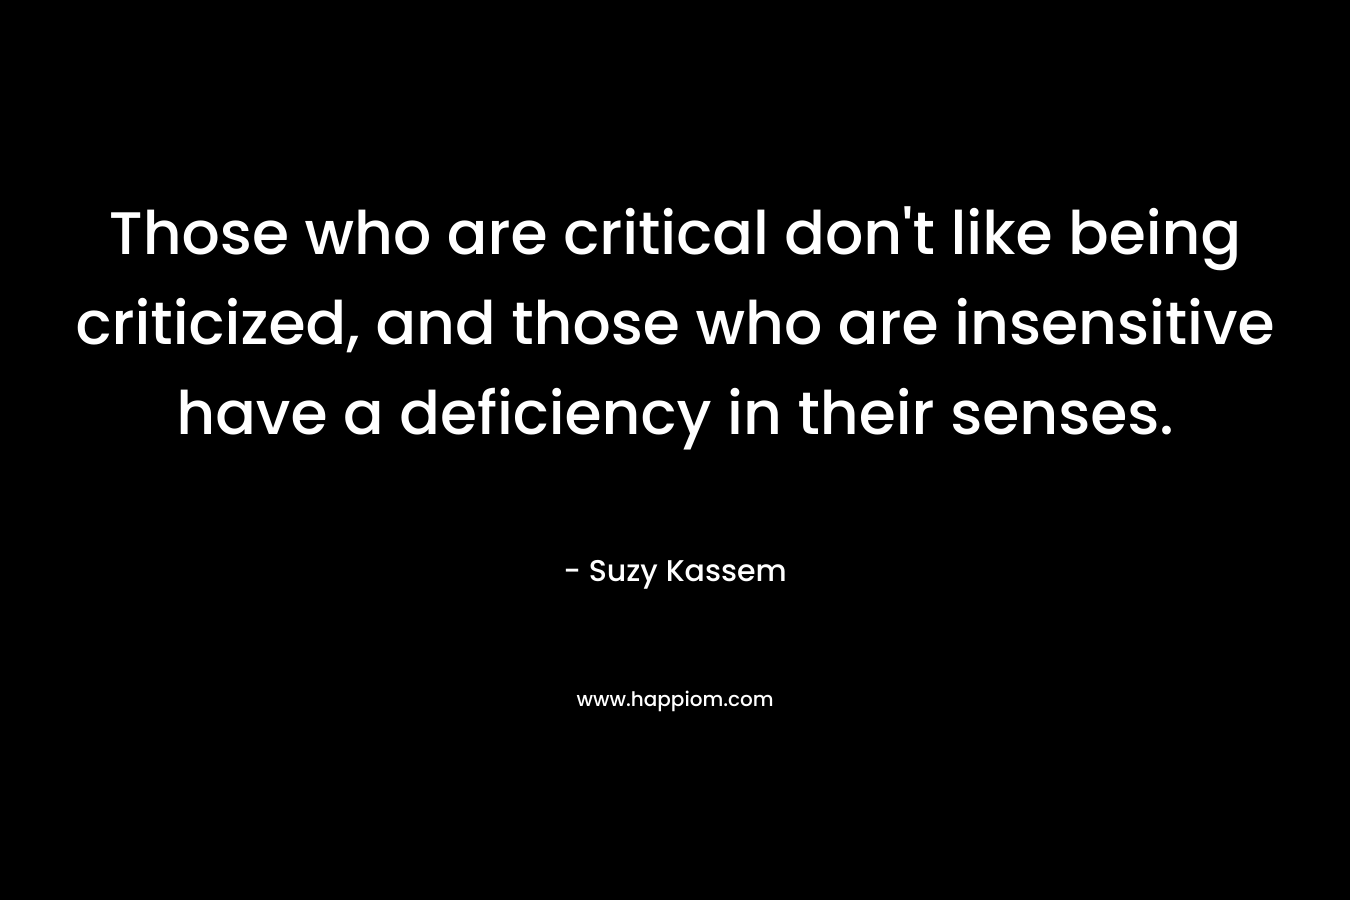 Those who are critical don't like being criticized, and those who are insensitive have a deficiency in their senses.